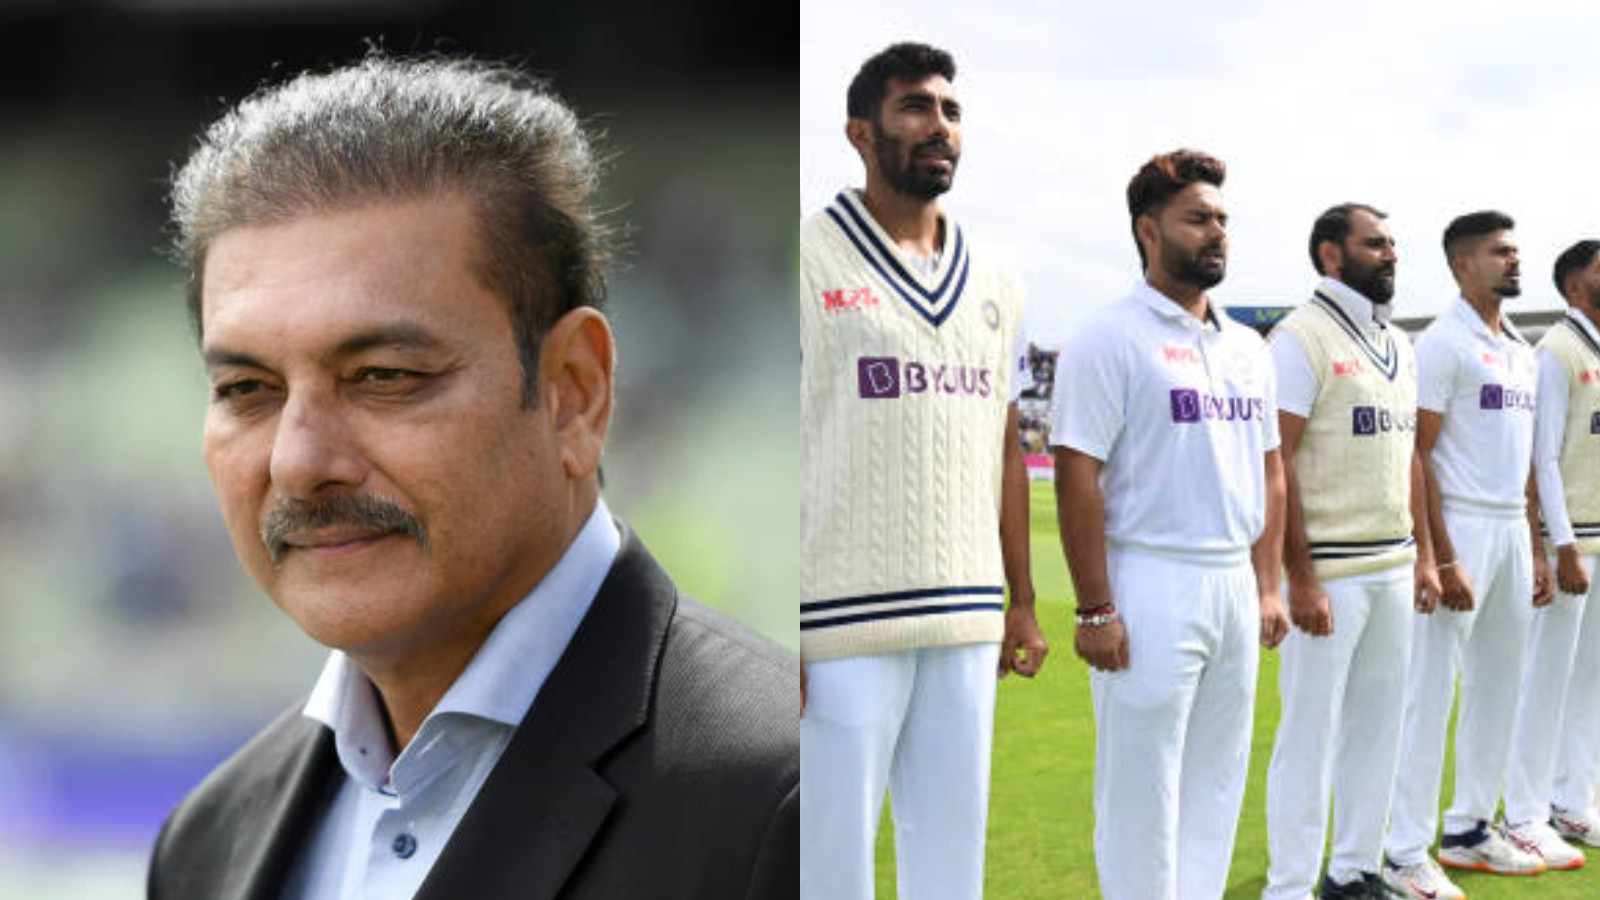 ENG v IND 2022: Ravi Shastri reveals the environment of 'fear' in dressing room before 5th Test last year